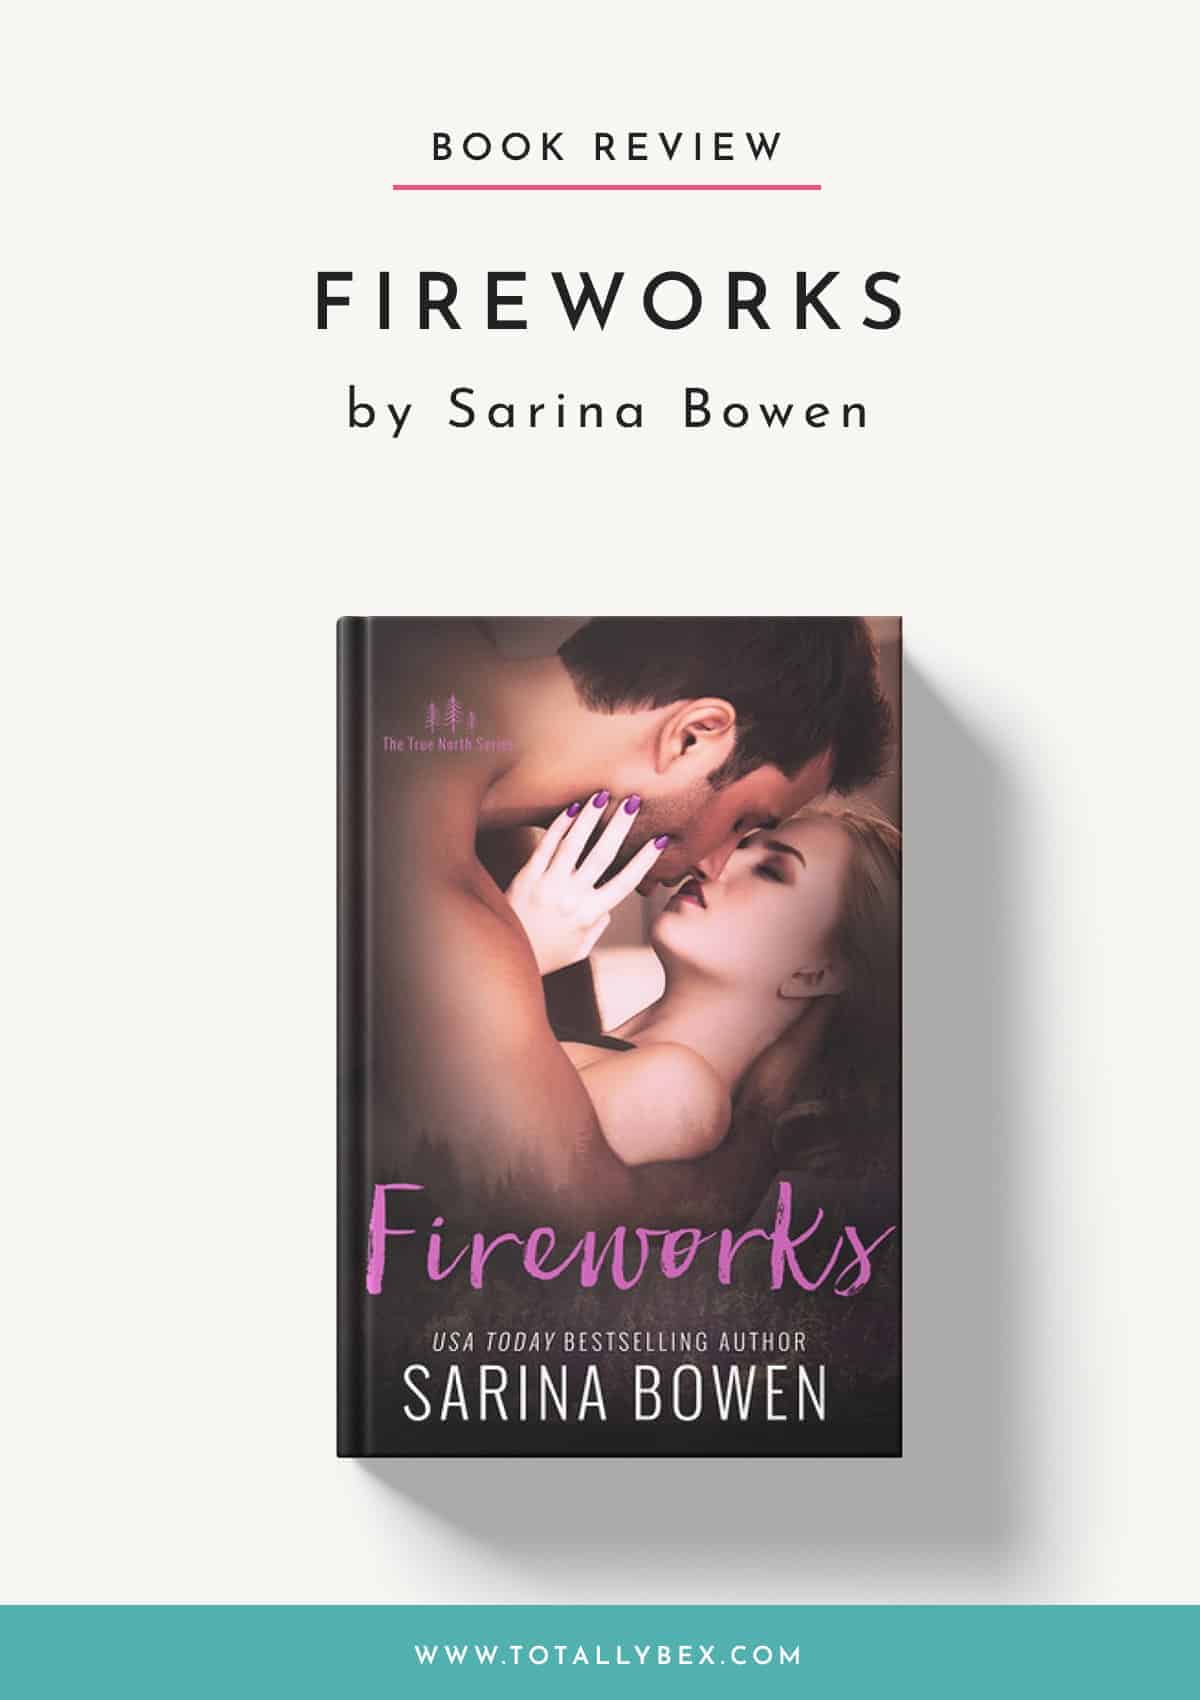 Fireworks by Sarina Bowen-Book Review